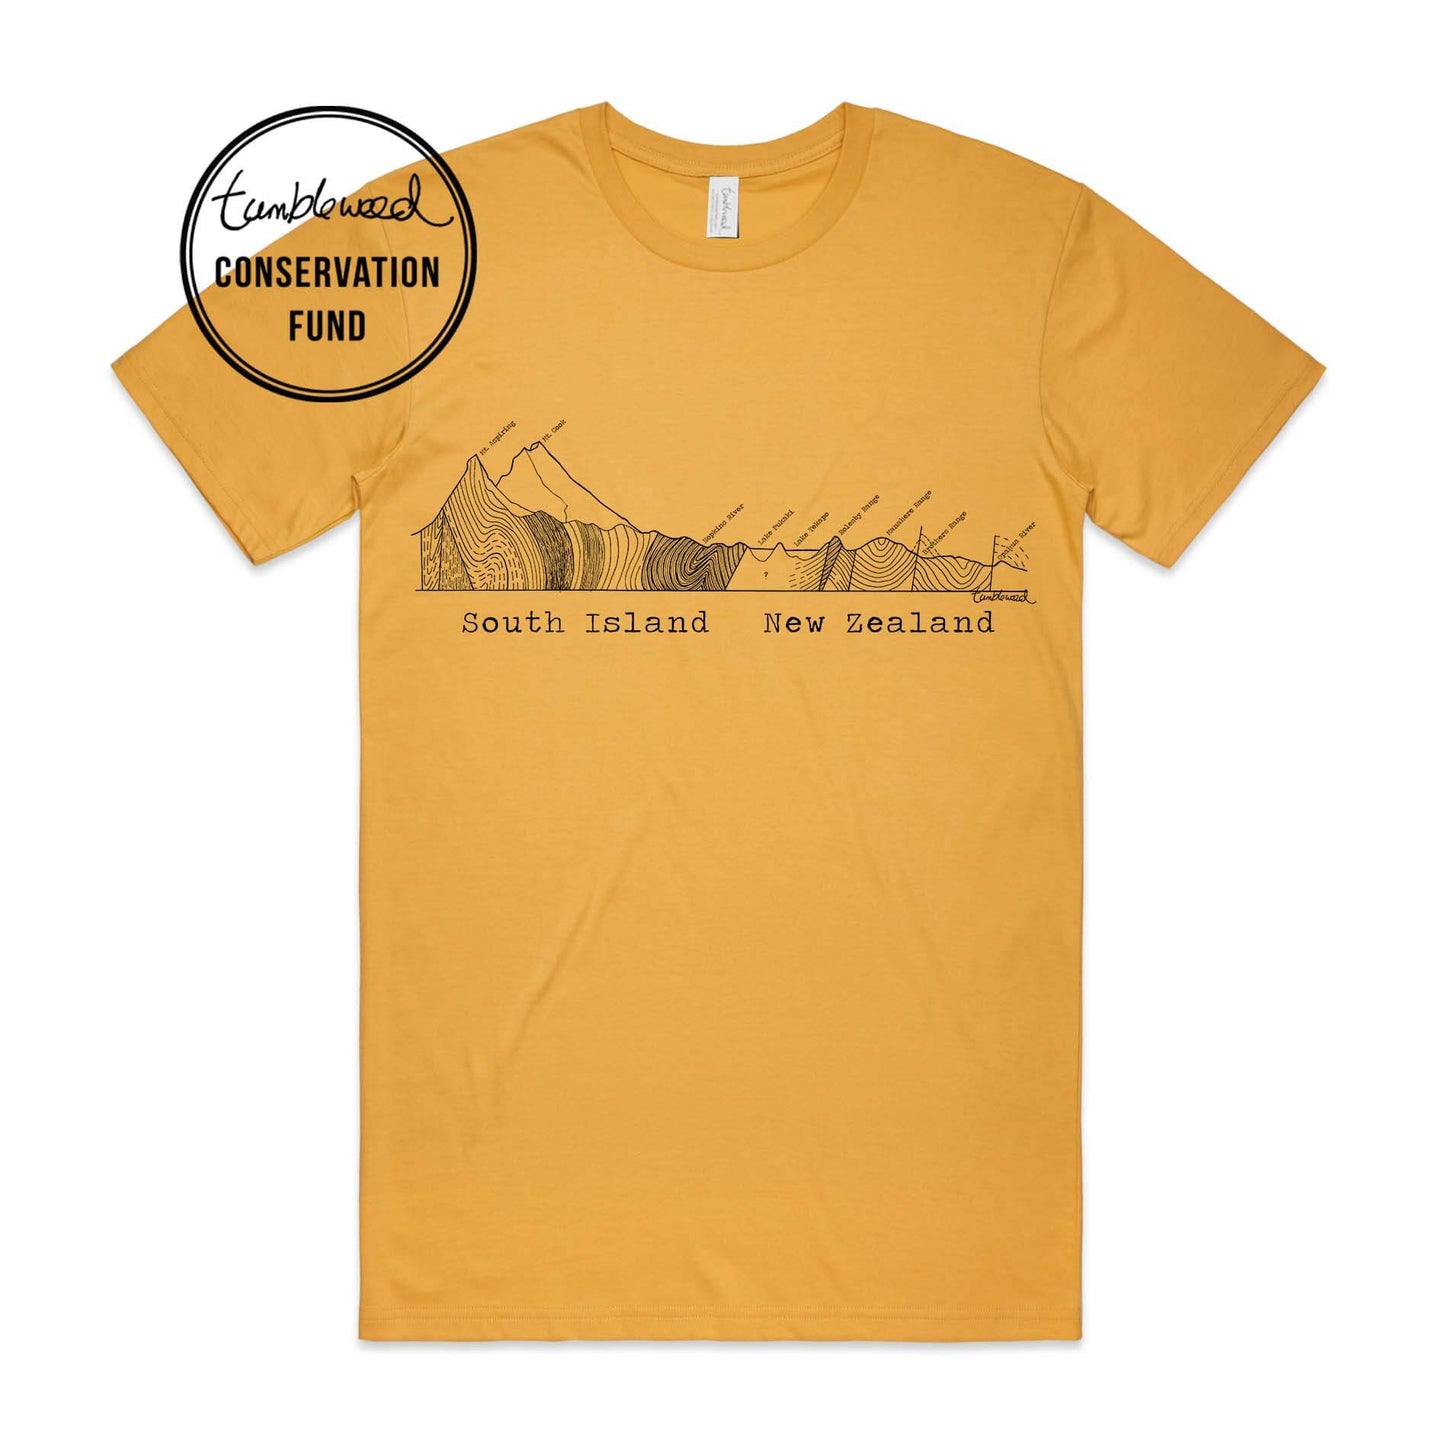 Mustard, female t-shirt featuring a screen printed South Island Cross Section design.